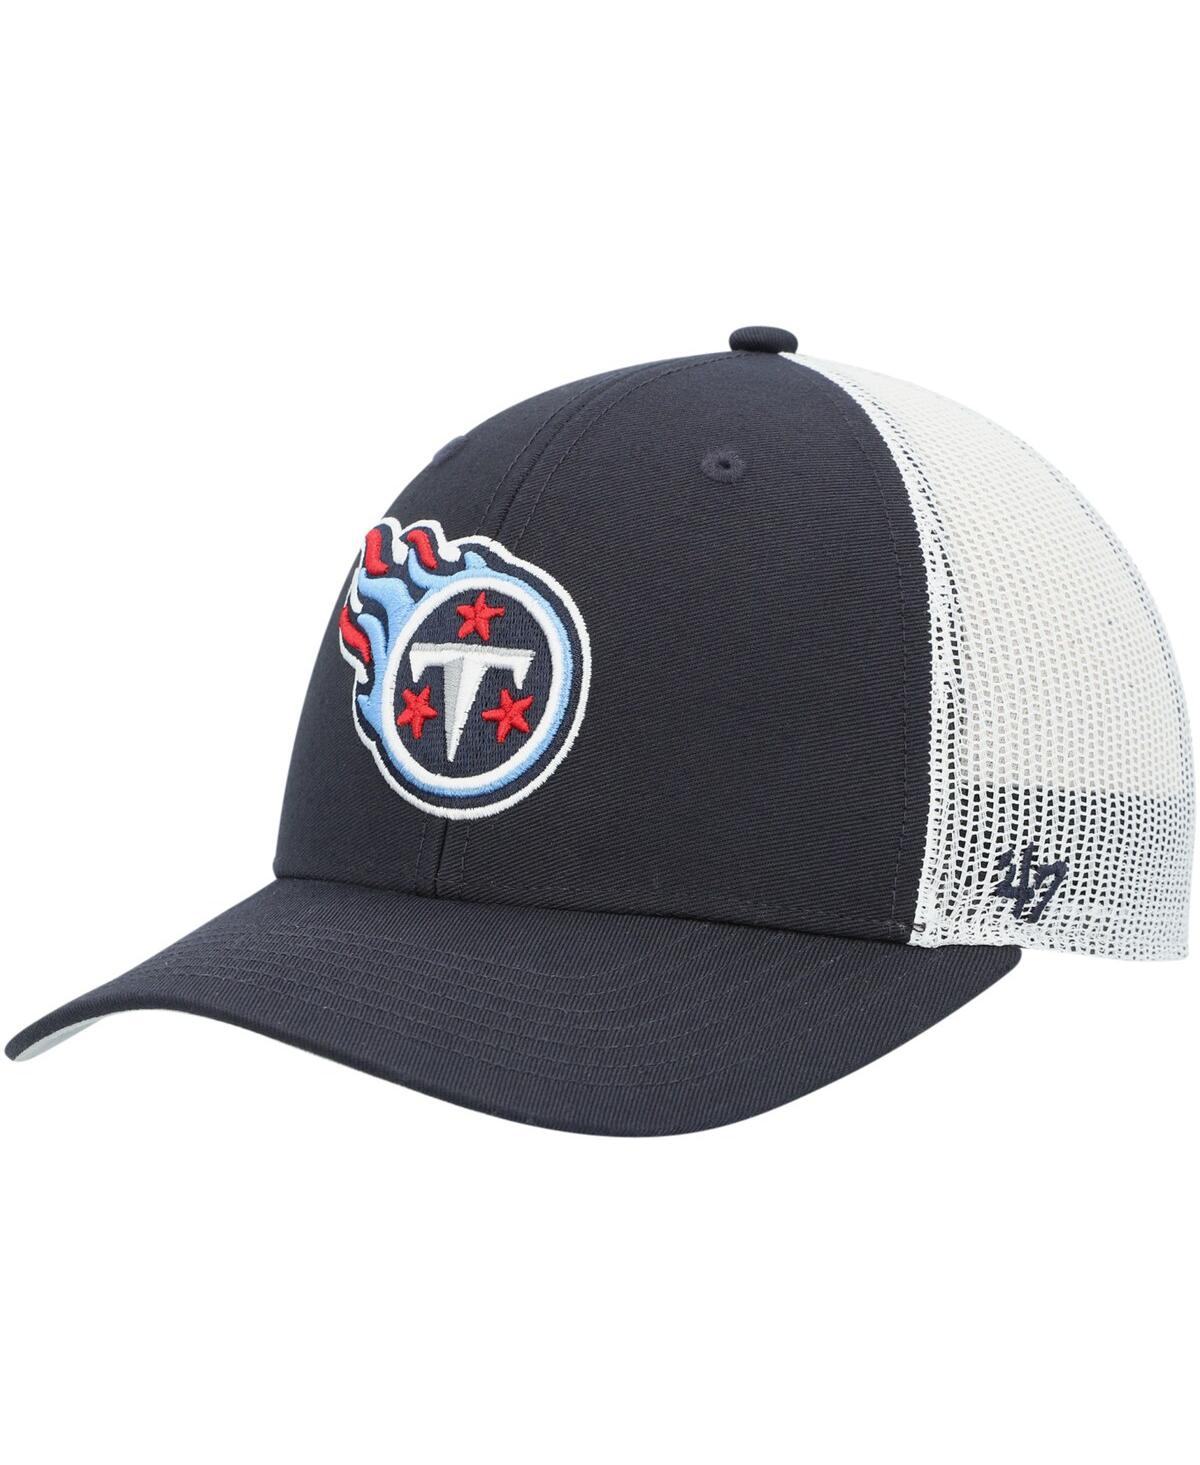 Shop 47 Brand Big Boys And Girls ' Navy, White Tennessee Titans Adjustable Trucker Hat In Navy,white